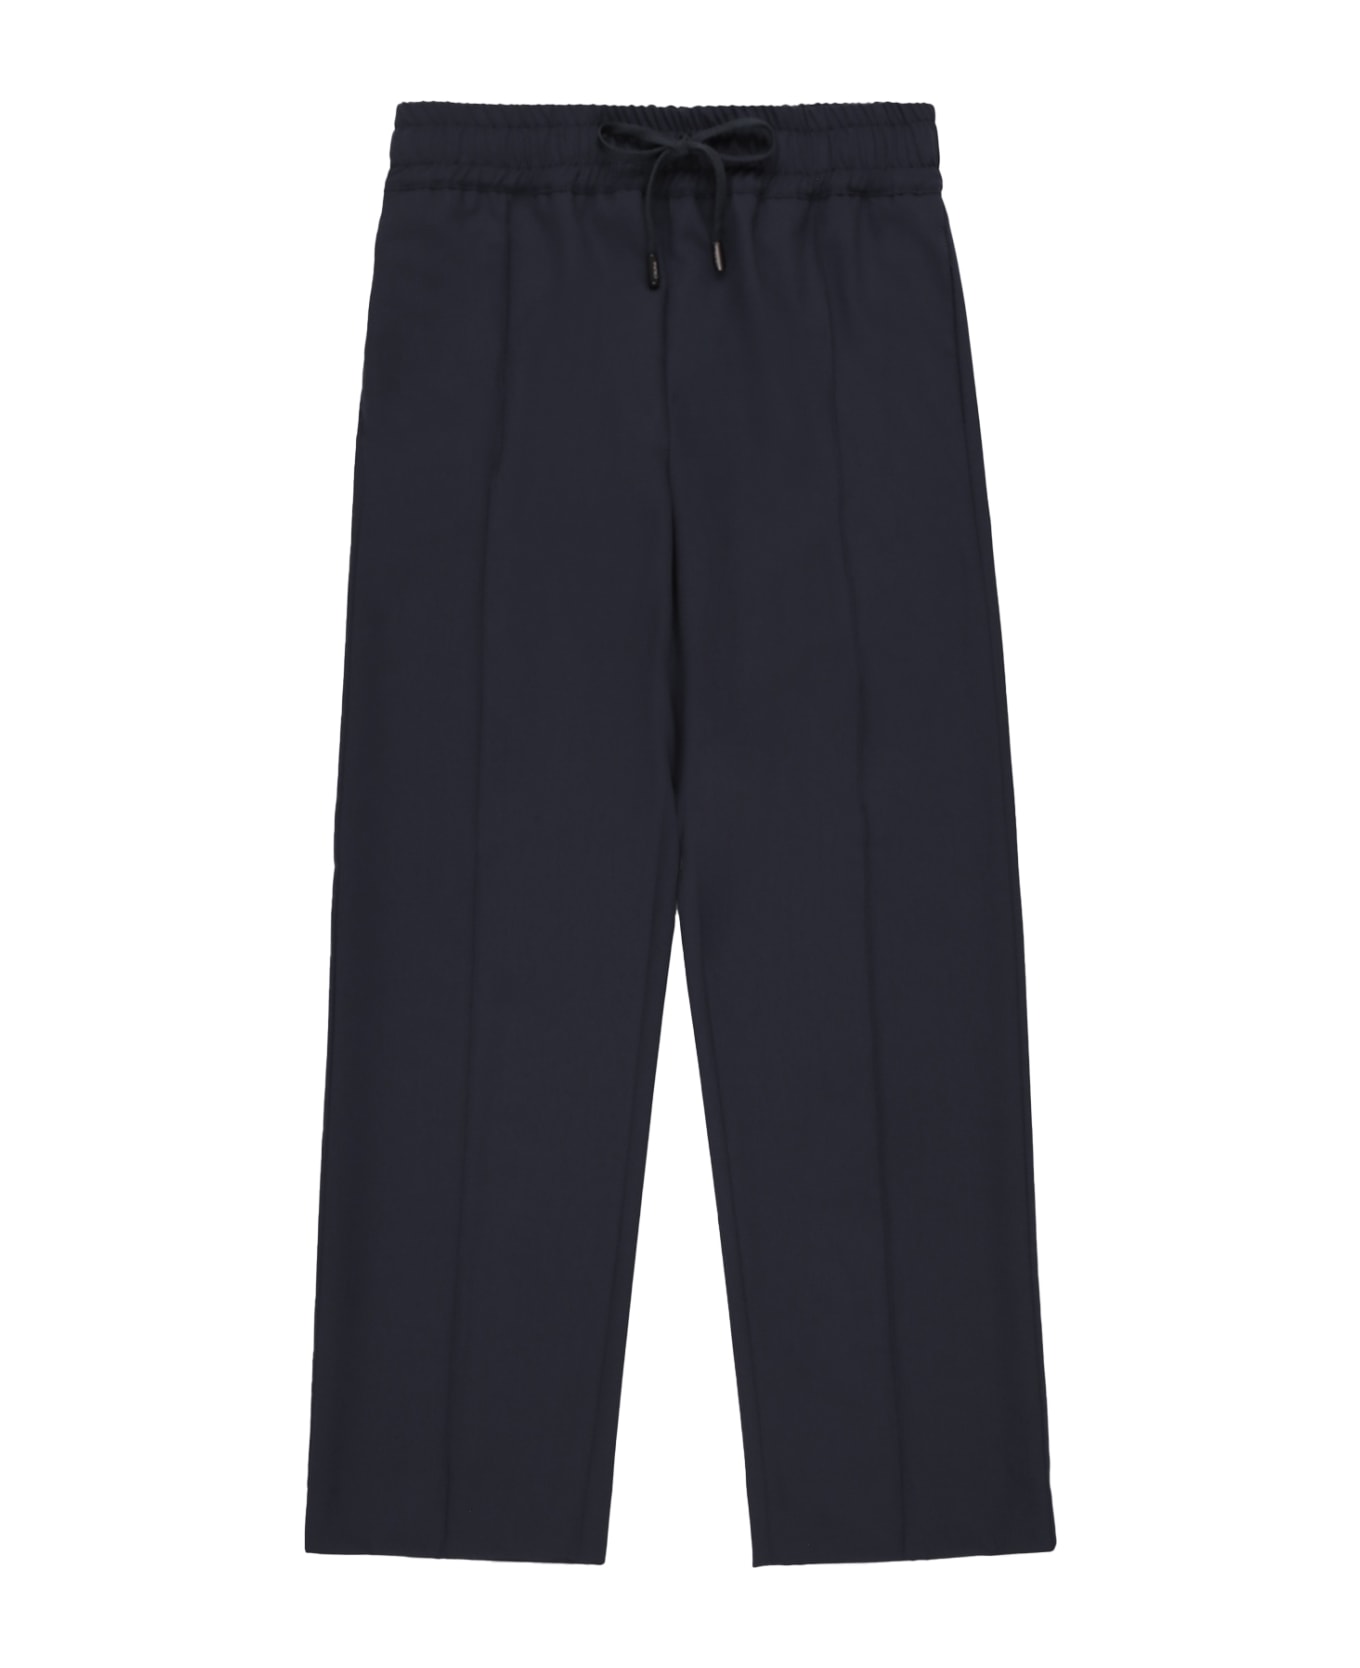 Cruna Navy Blue Viscose Trousers - NOTTE ボトムス